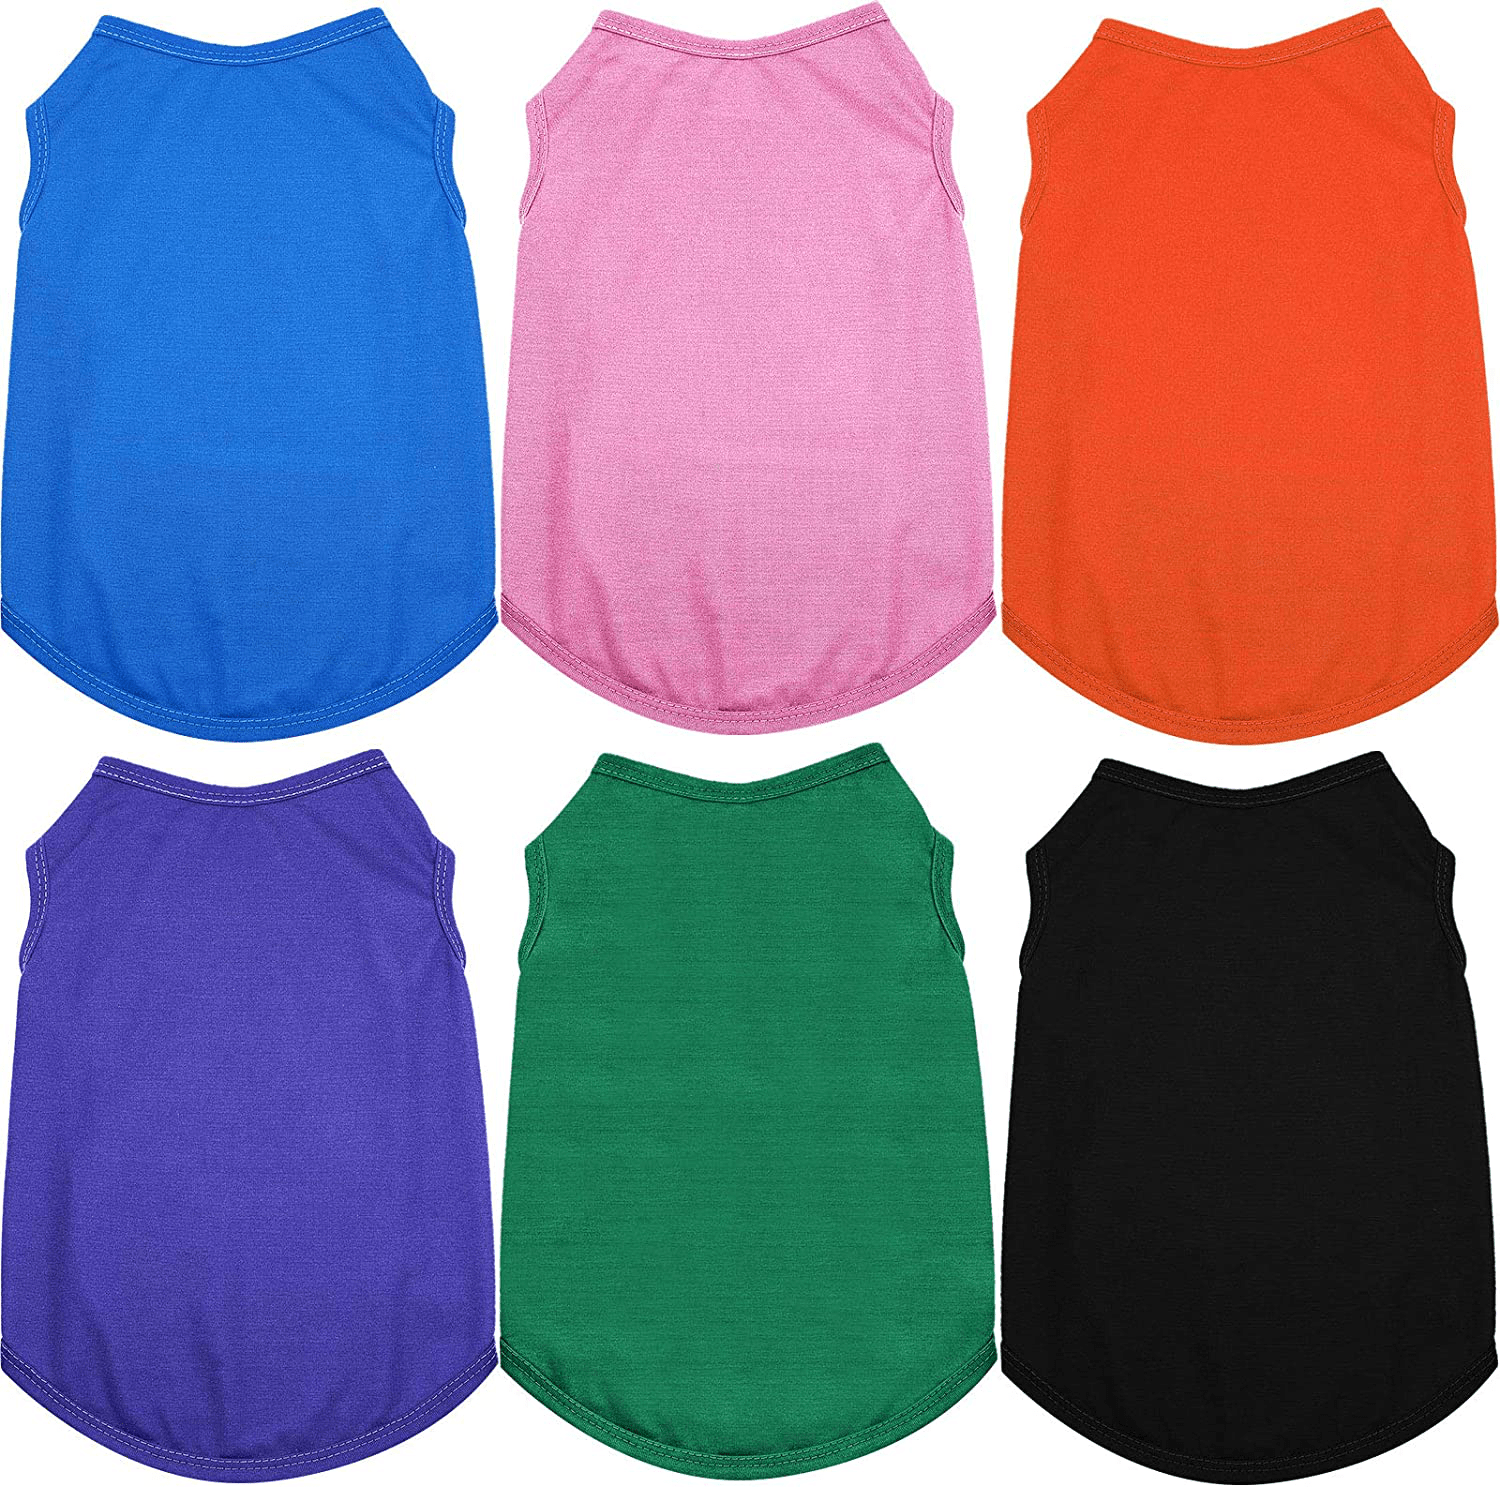 6 Pieces Dog Blank Shirt Dog T-Shirts Basic Pet Vest Clothes Soft and Breathable Pet Apparel for Small Medium Dogs Cats (Black, Purple, Green, Gray, Coffee, Navy, M) Animals & Pet Supplies > Pet Supplies > Cat Supplies > Cat Apparel Geyoga Blue, Black, Orange, Pink, Purple, Green Medium 